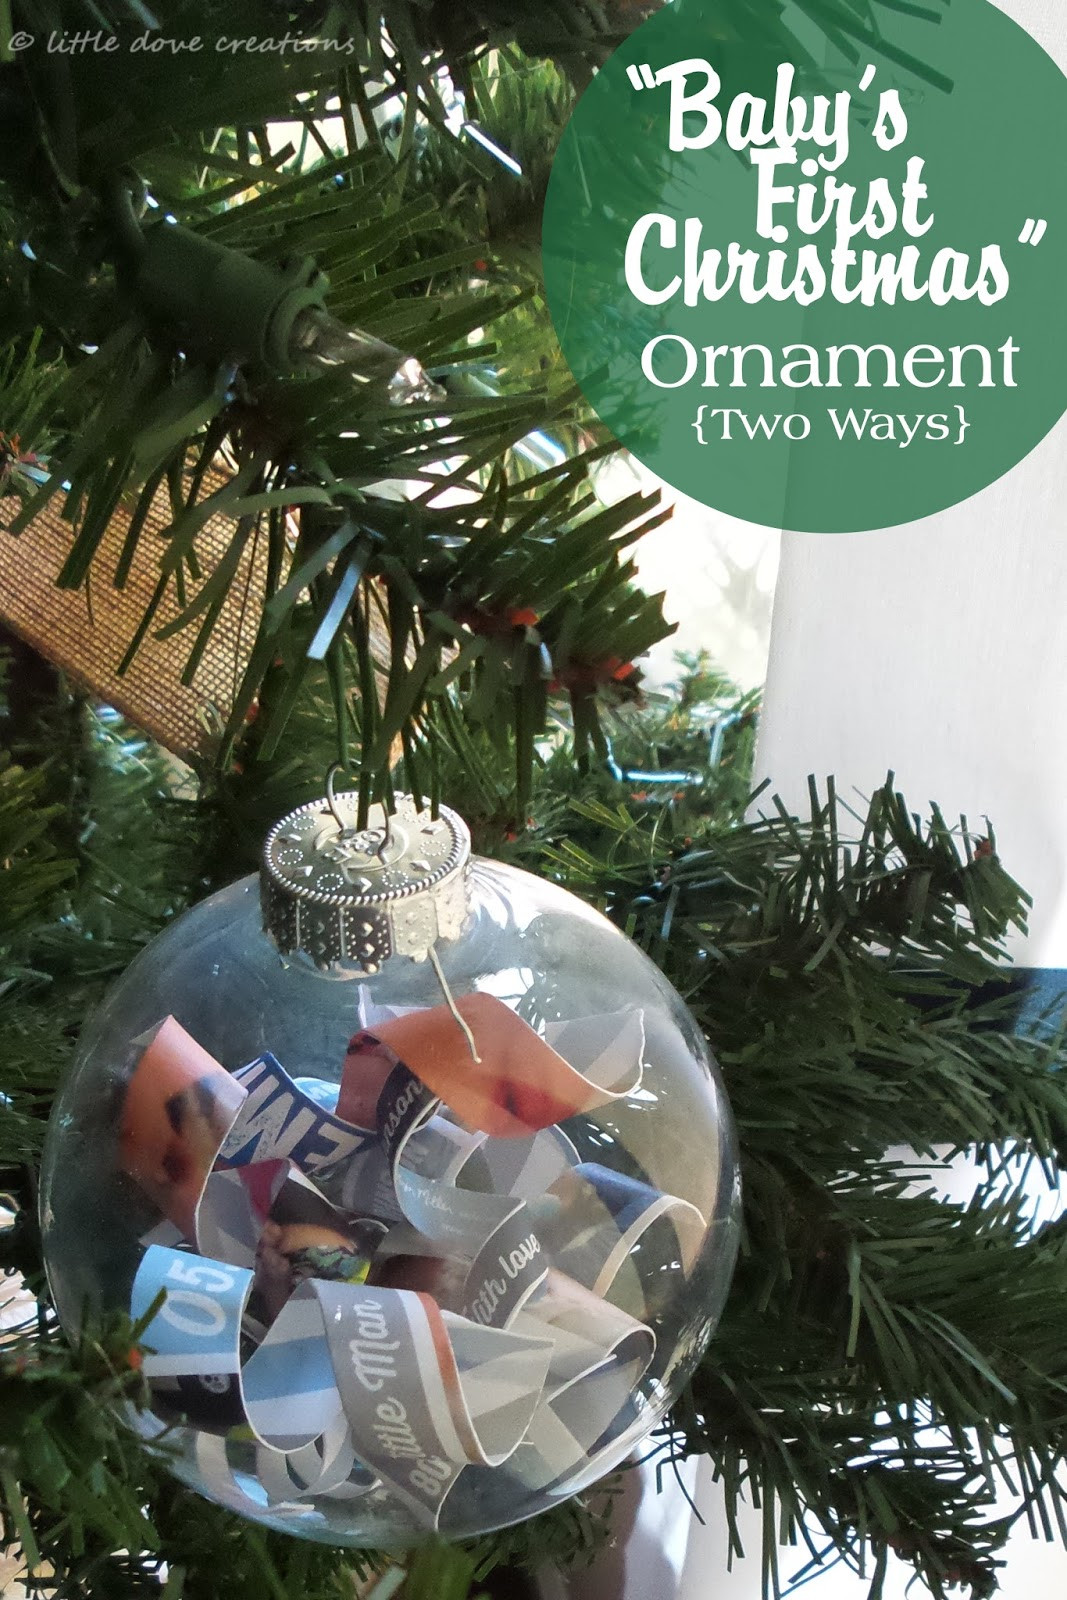 Baby Christmas Ornaments DIY
 diy "baby s first Christmas" ornaments Little Dove Blog